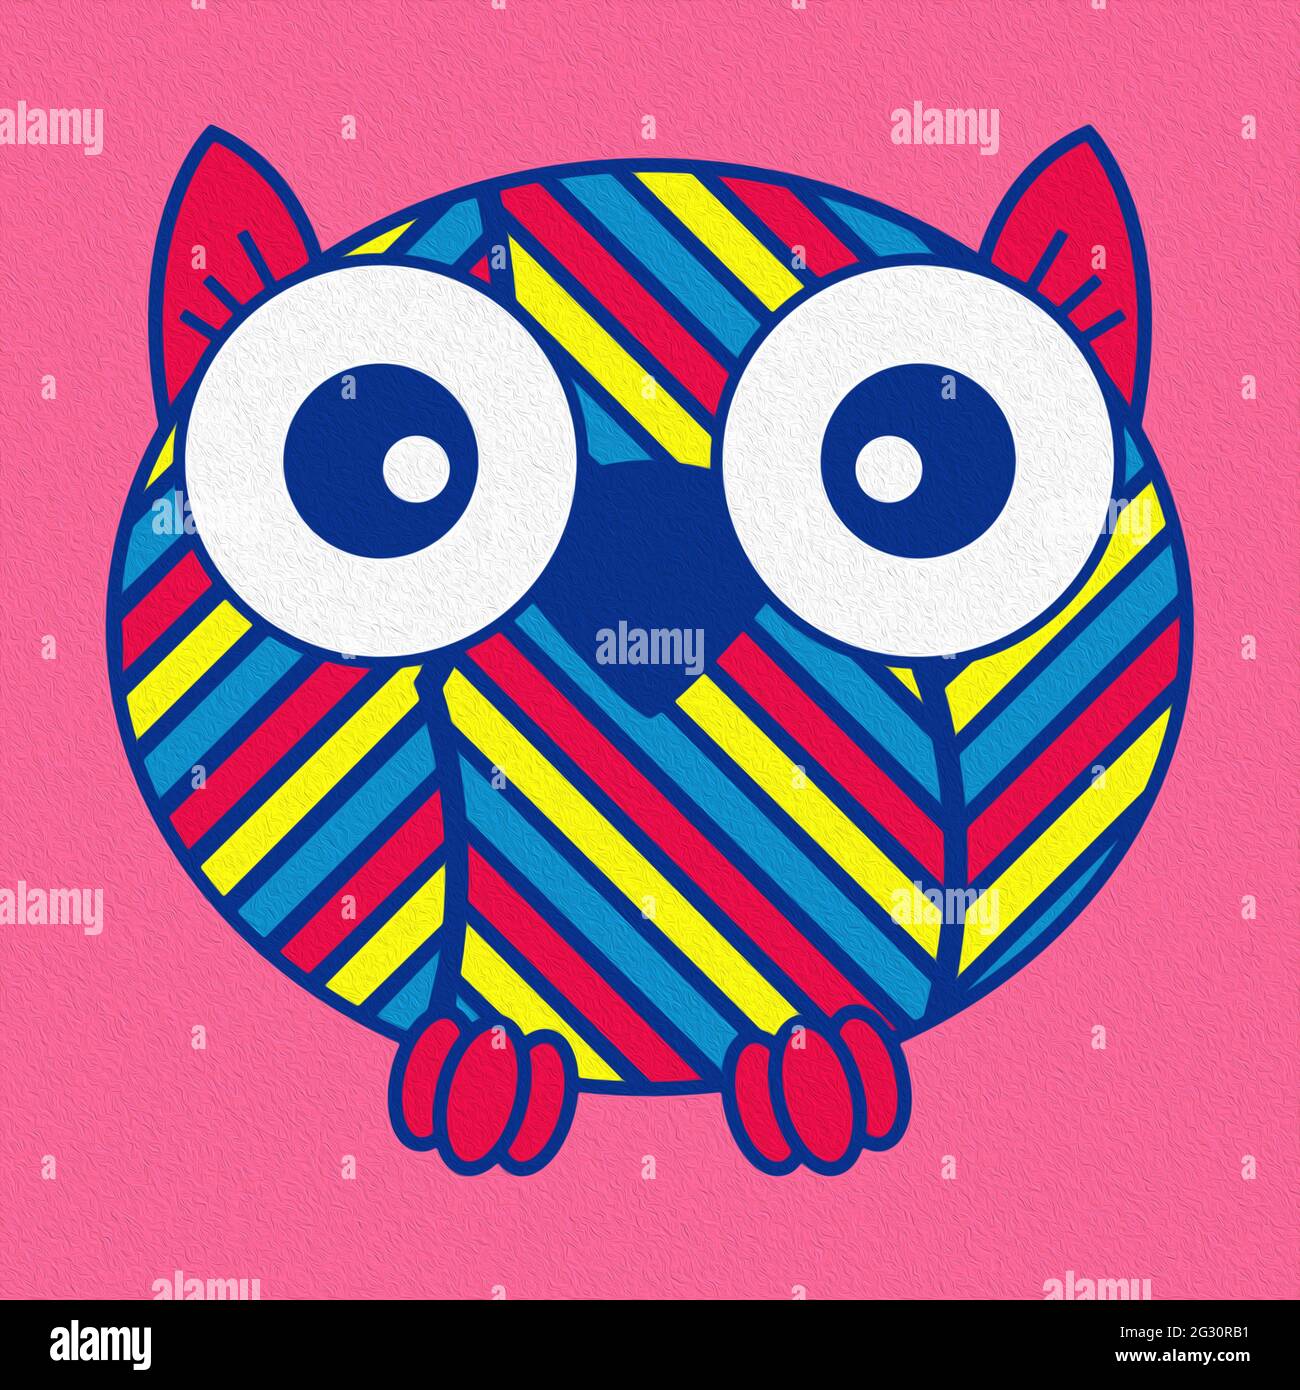 Illustration of a funny cartoon oval owl on pink background, made as an oil painting Stock Photo